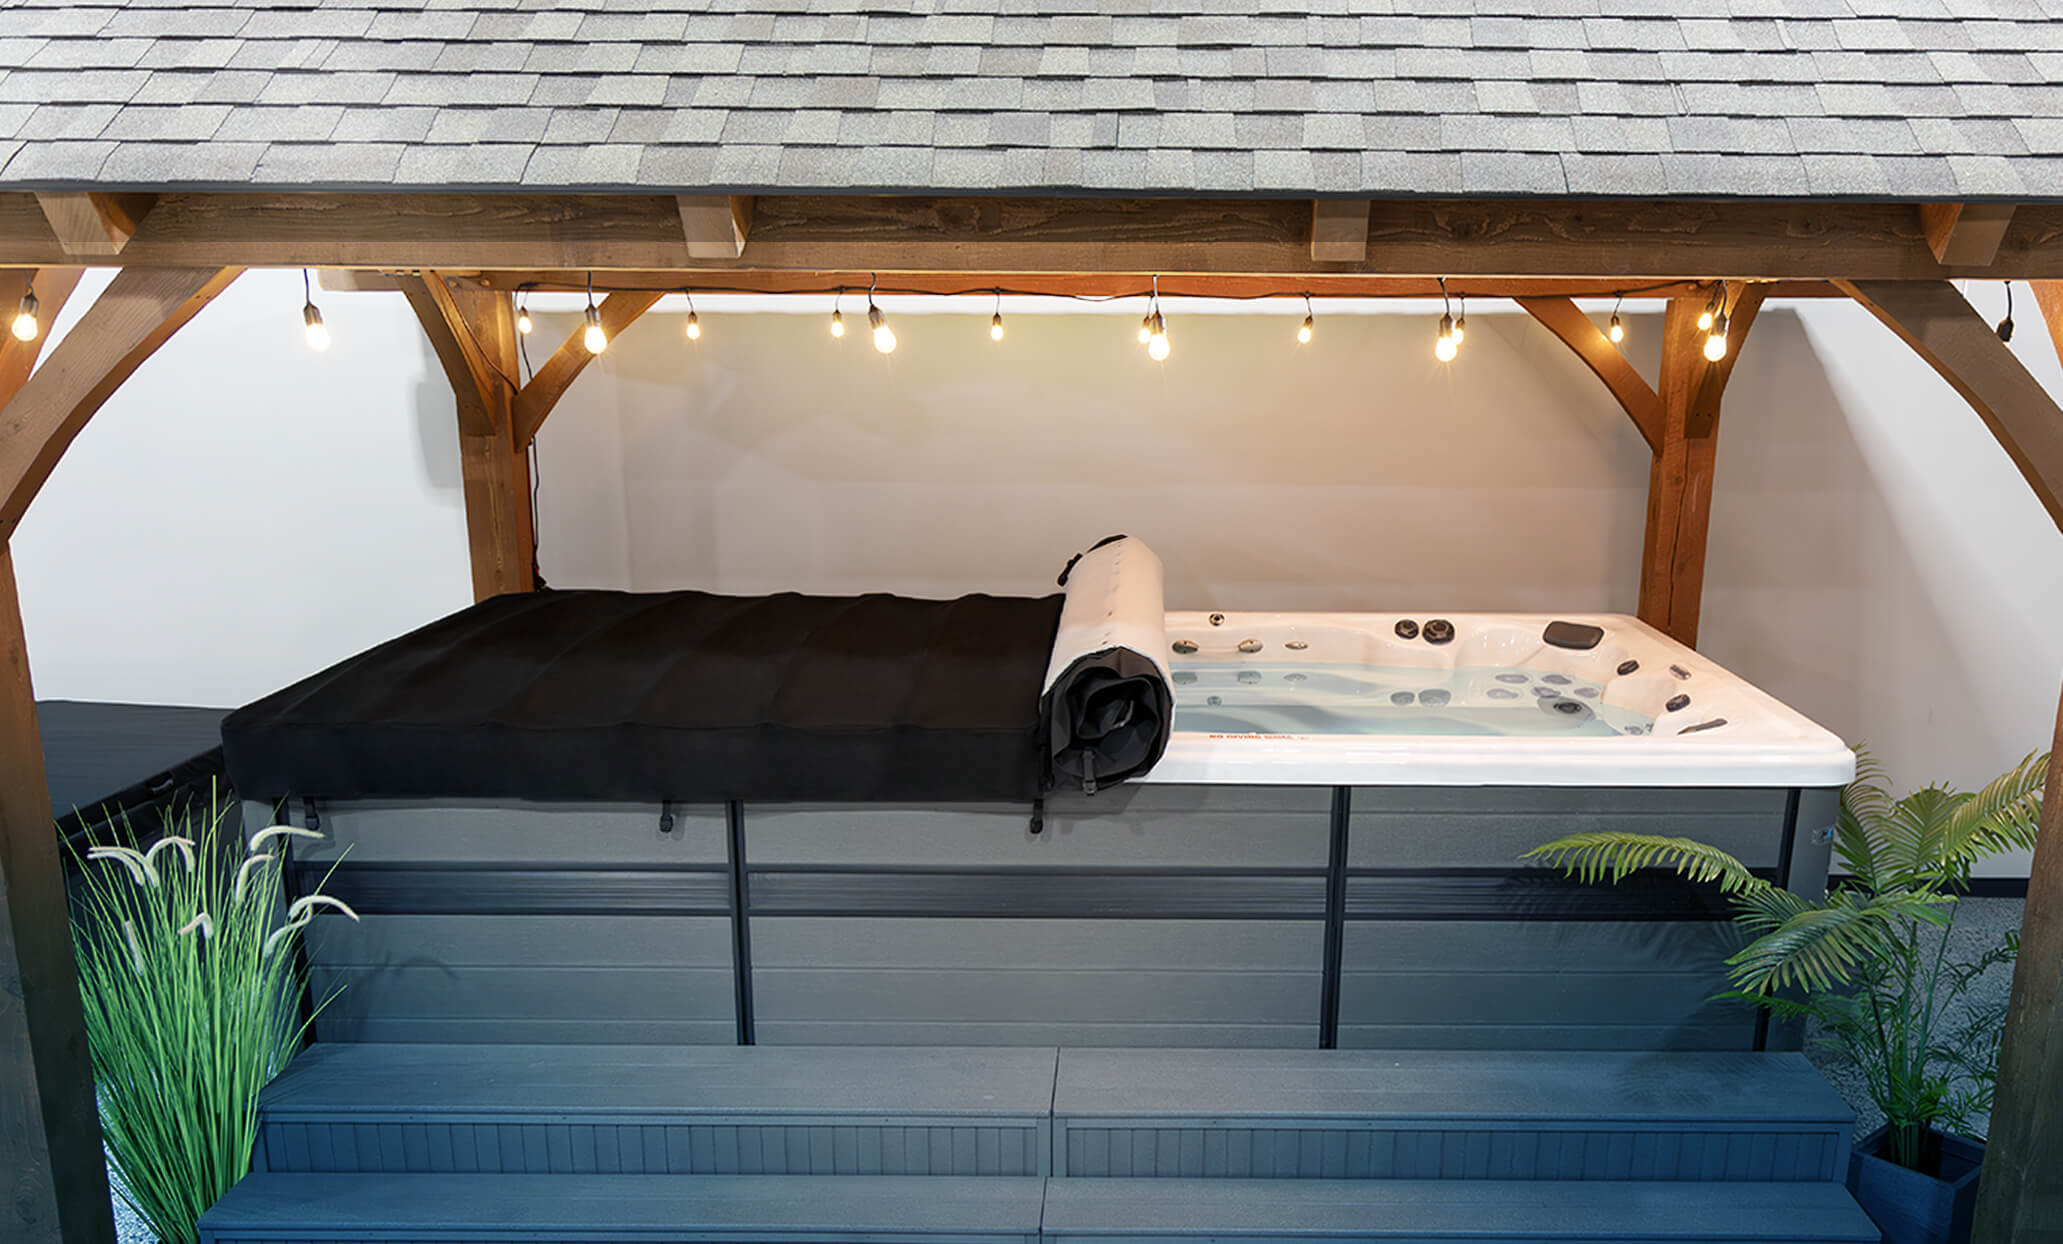 Introducing the axis cover system by master spas